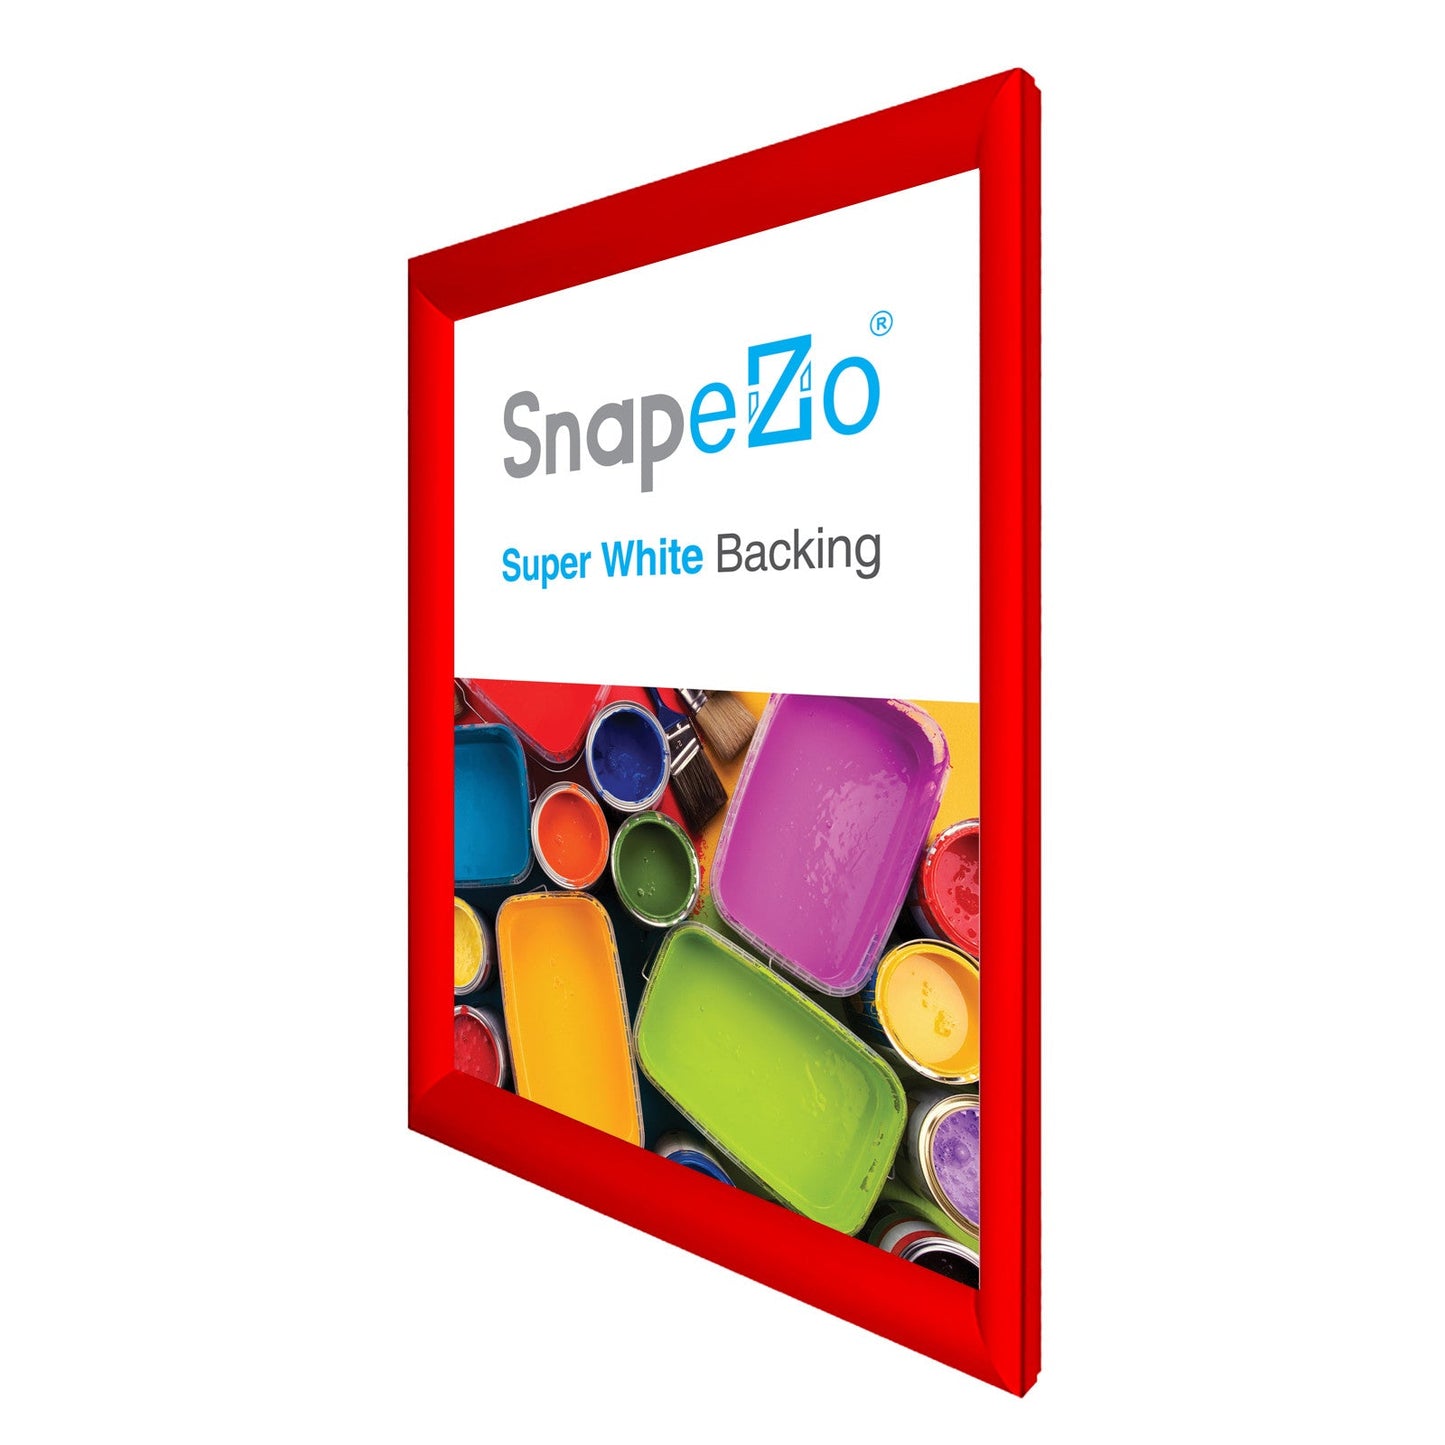 22x30 Red SnapeZo® Snap Frame - 1.2" Profile